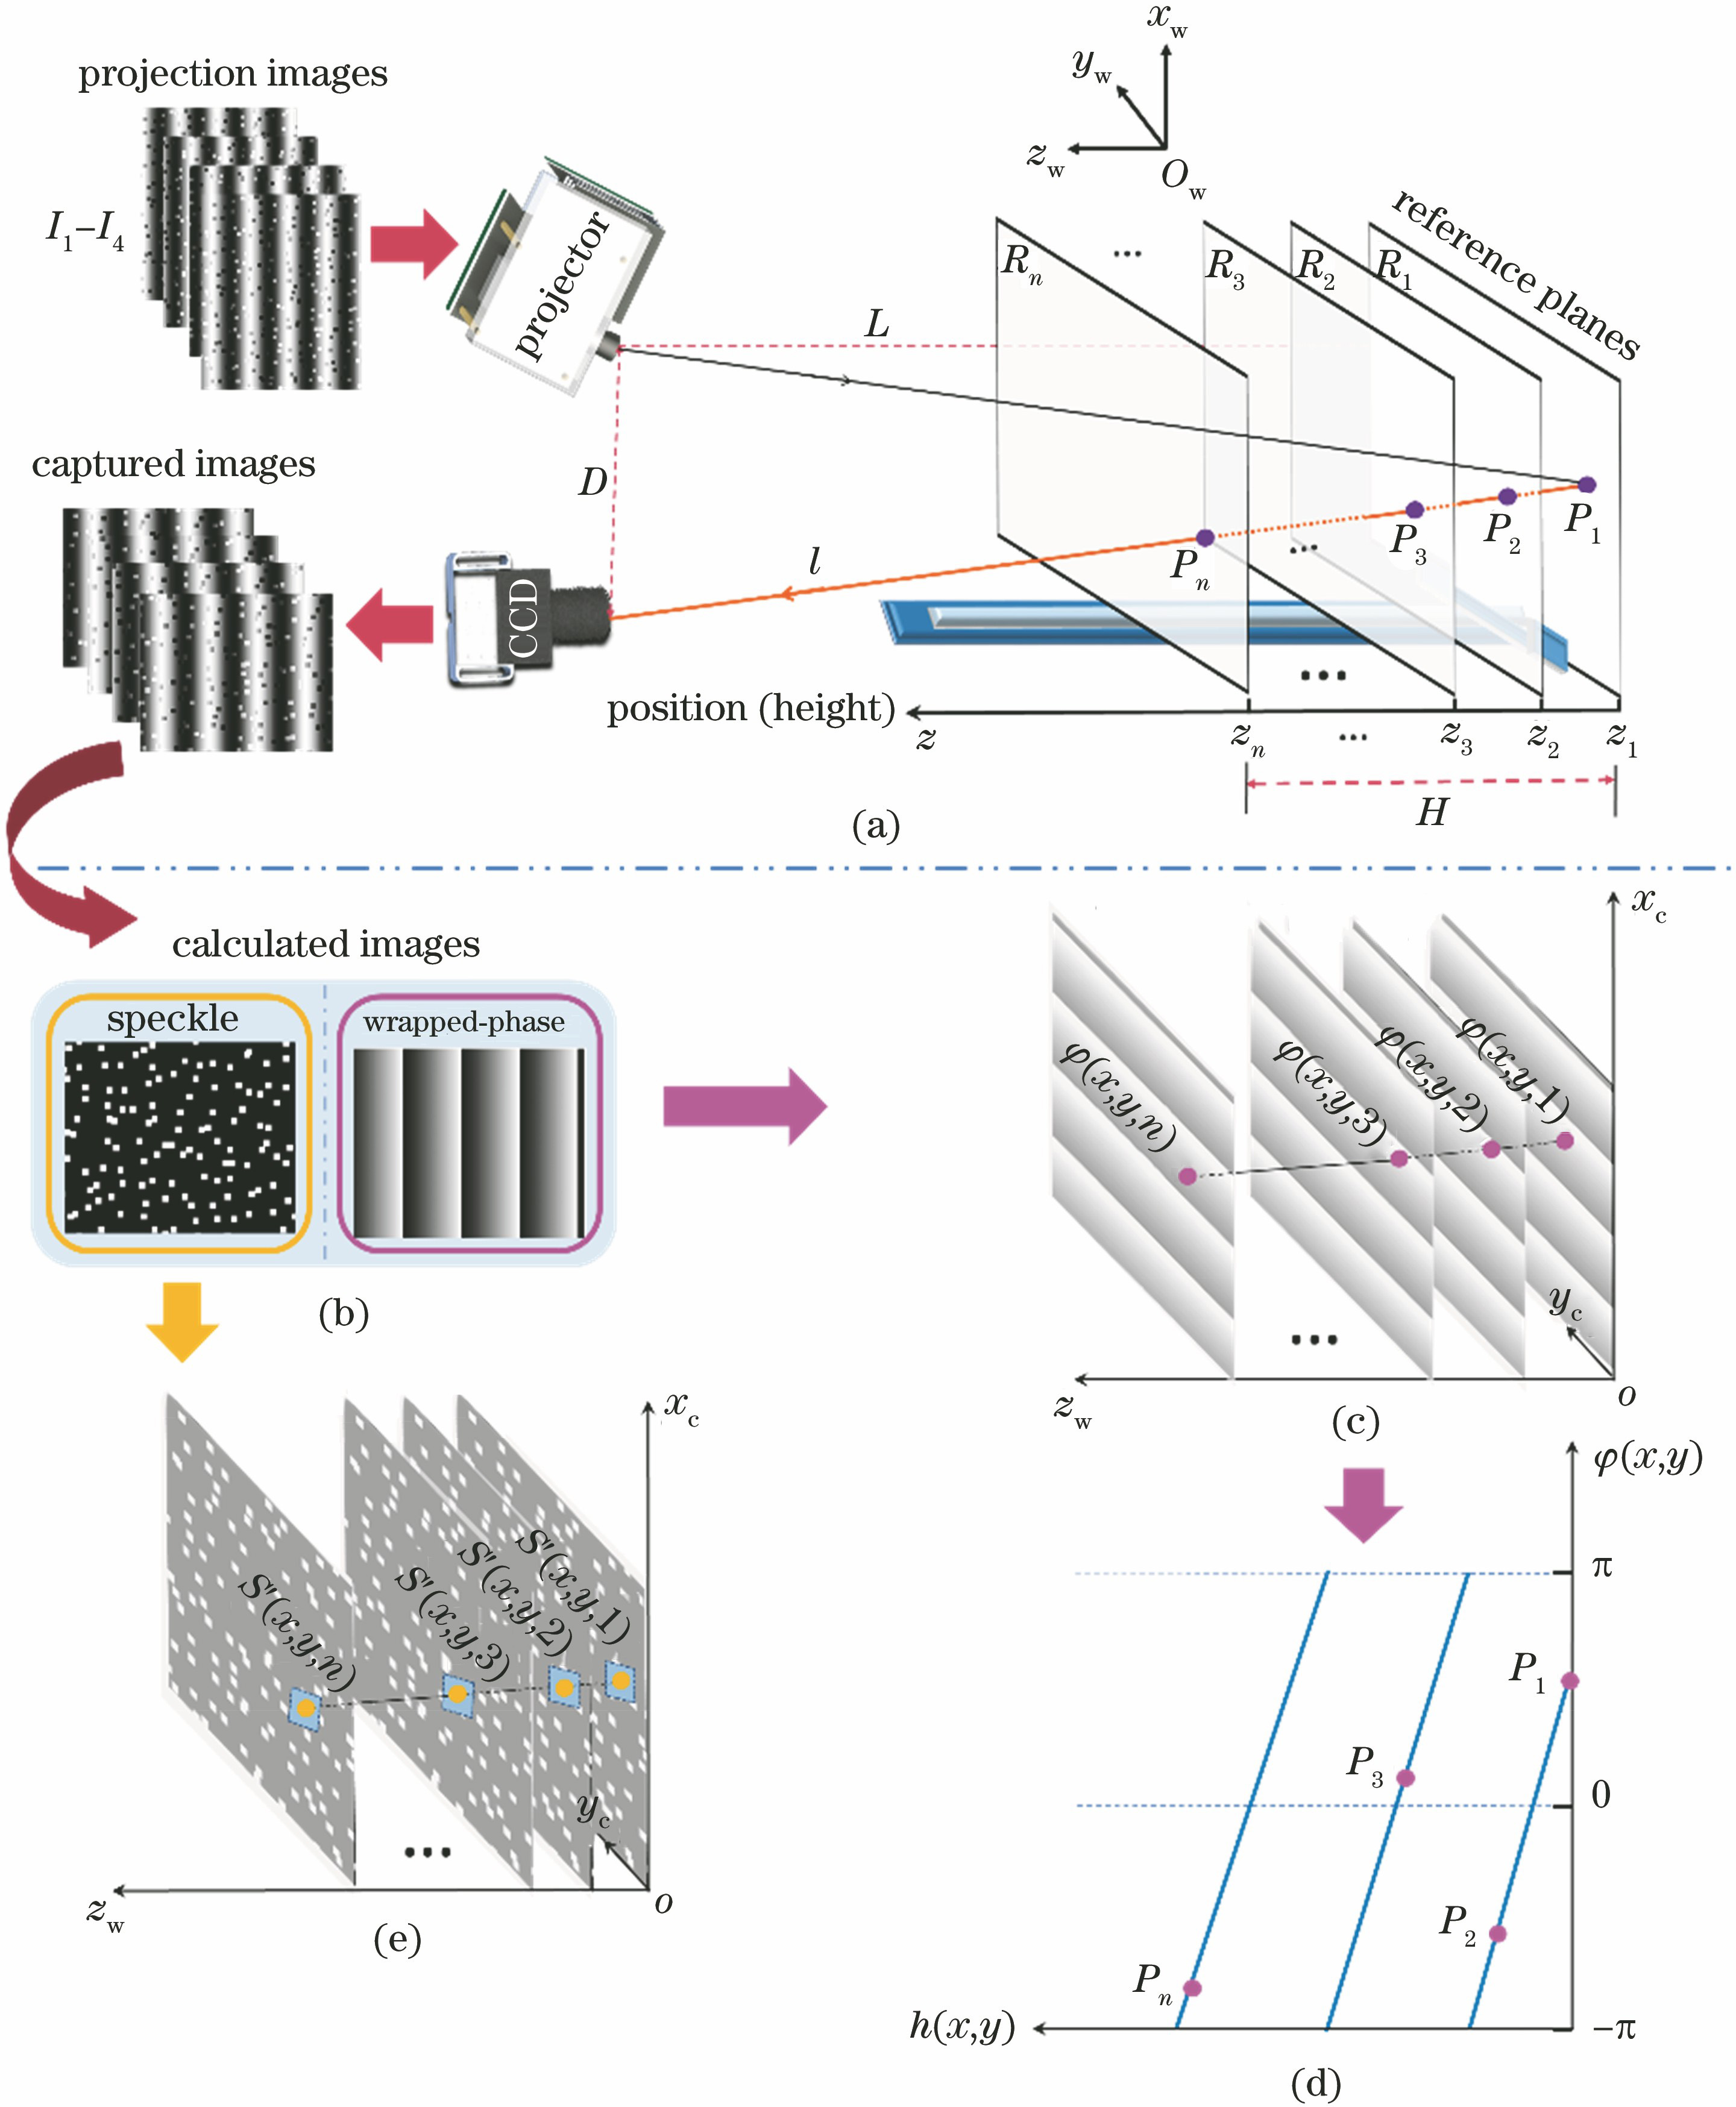 Schematic of preparation before measurement. (a) Principle diagram of measuring system; (b) calculated wrapped phase and reference speckle; (c) wrapped phase maps at different heights for building LUT; (d) establishment of wrapped phase-to-height LUT of one pixel along light ray l; (e) reference speckle images at different heights for saving in advance